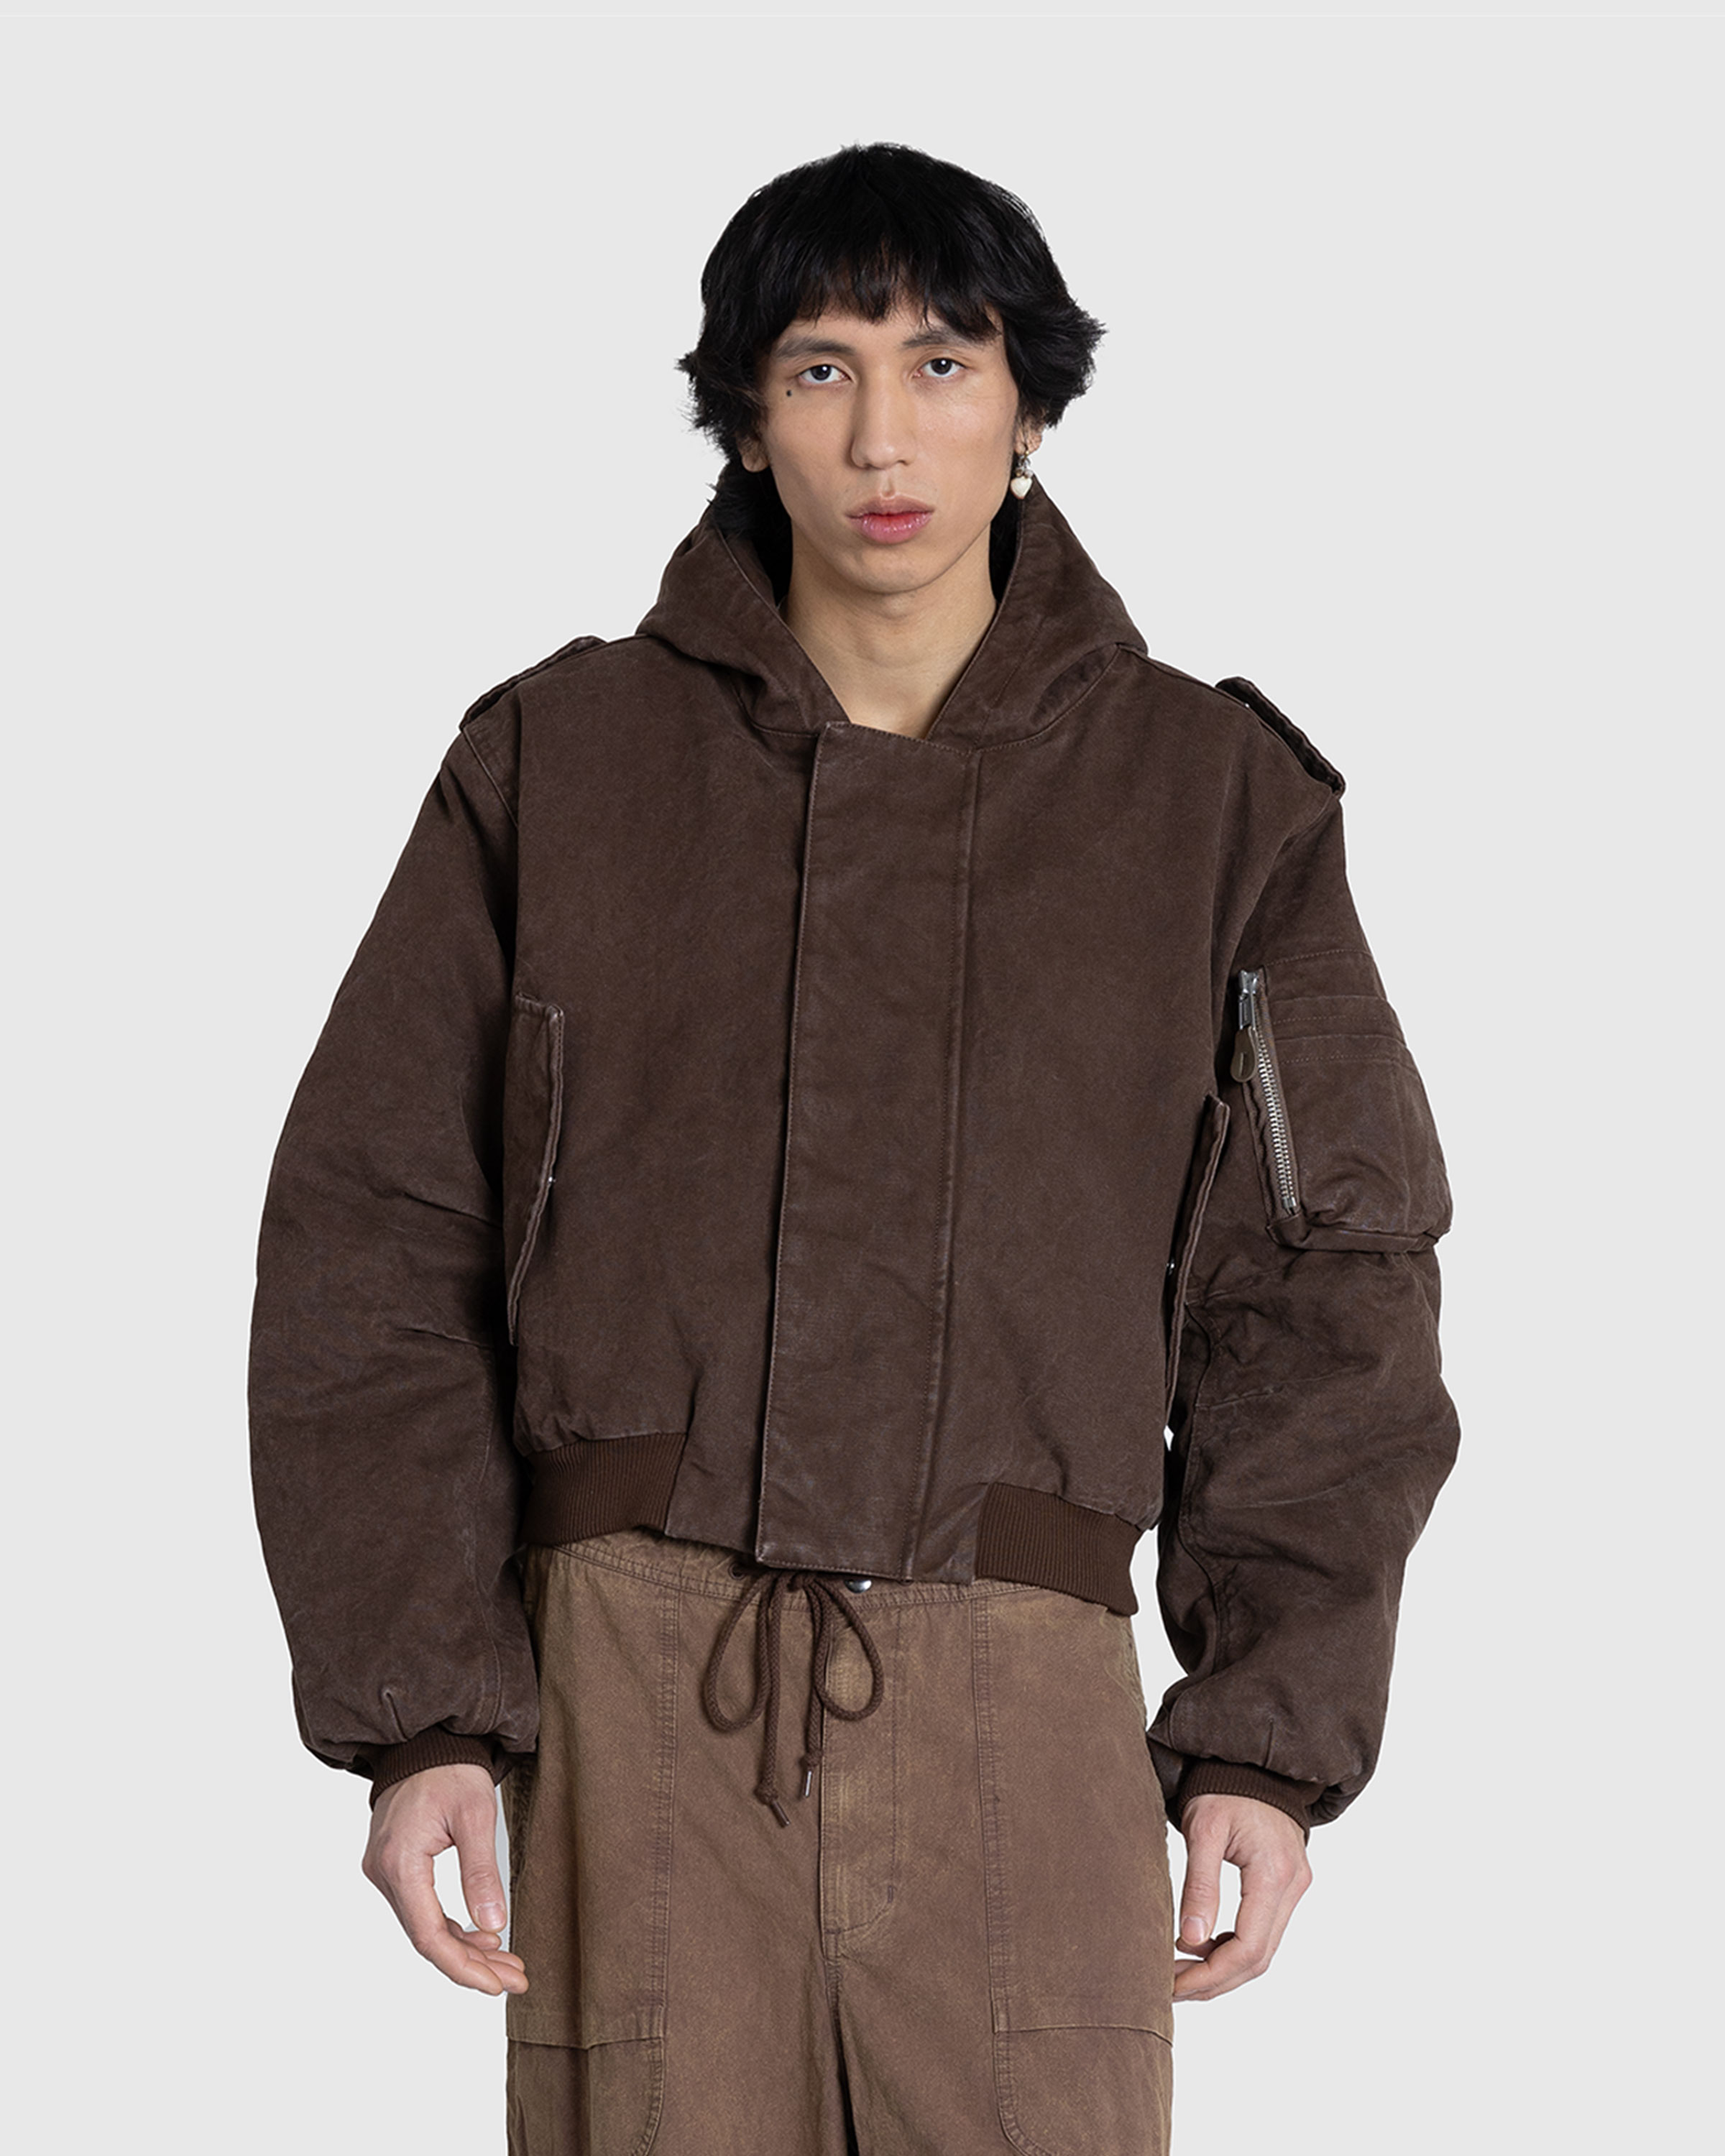 Entire Studios – W2 Bomber Military Mud - Outerwear - Brown - Image 2